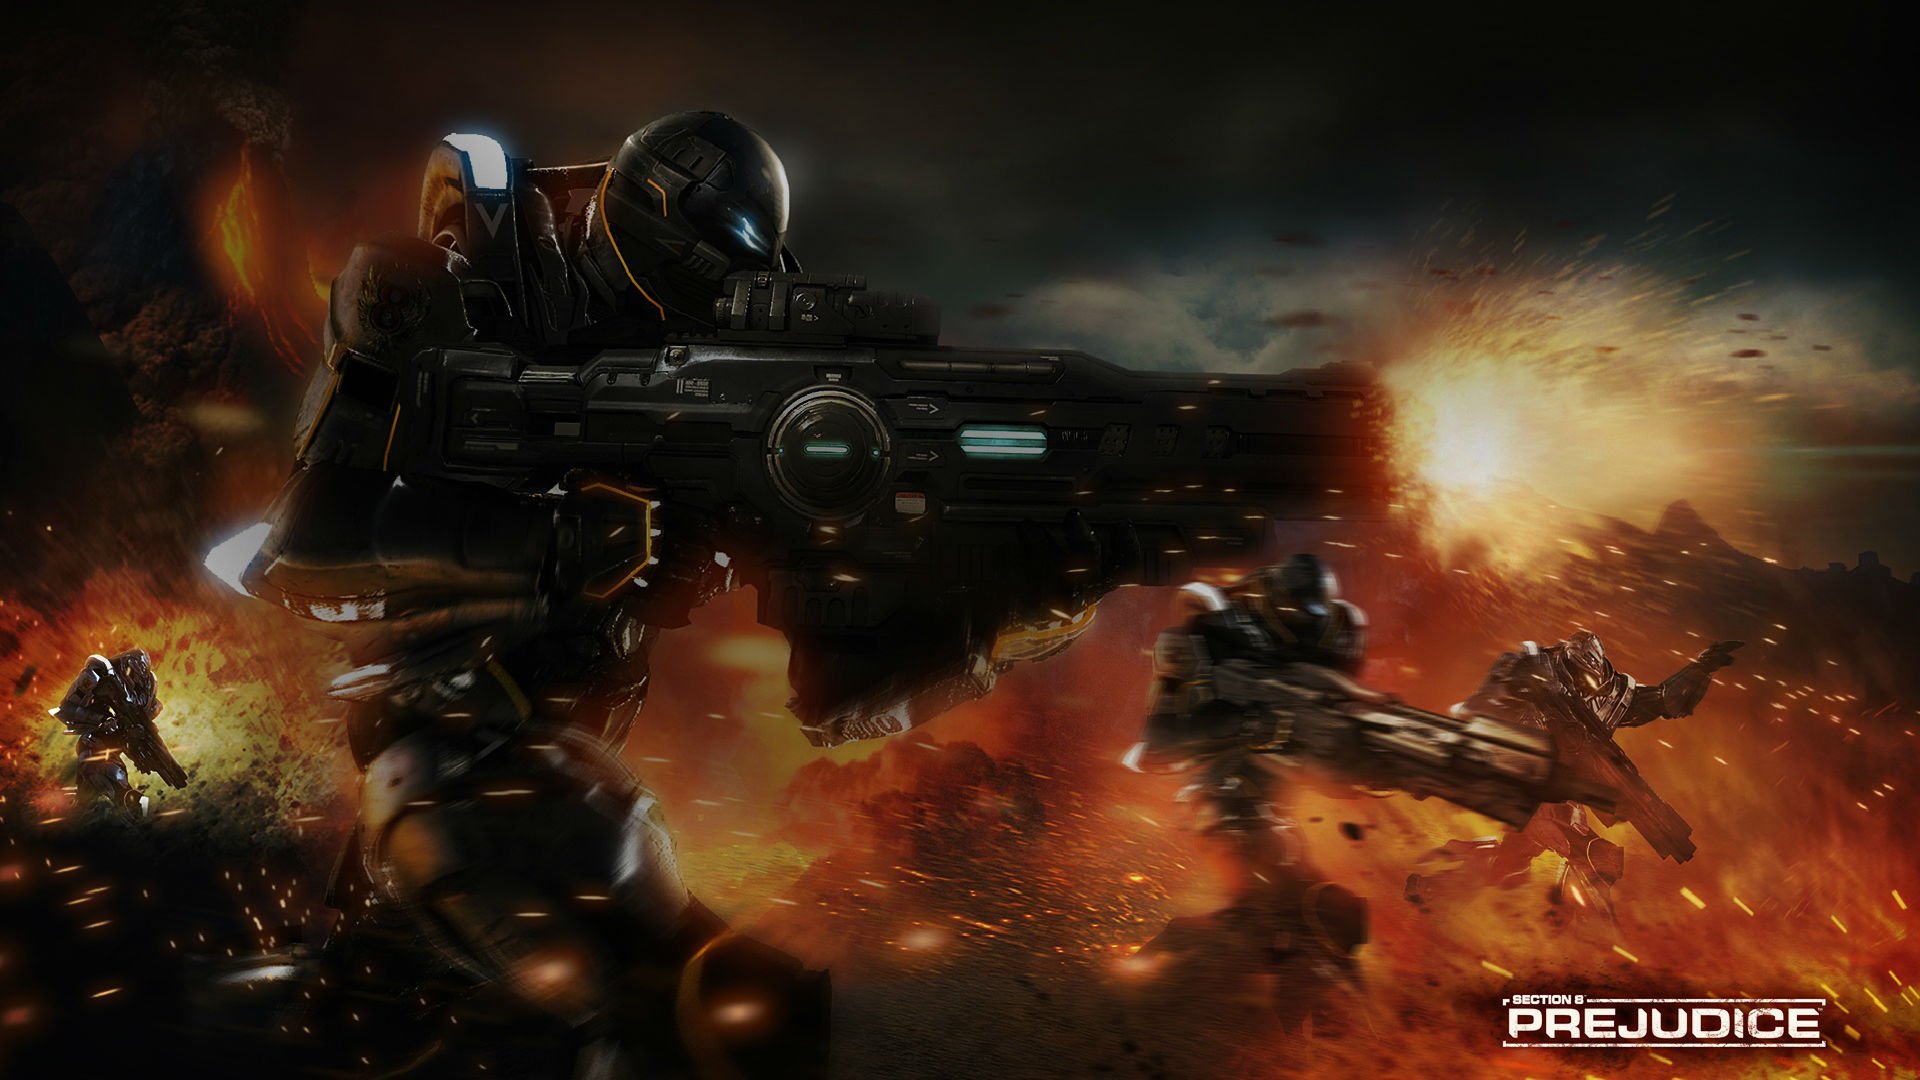 section, 8, Action, Fighting, Futuristic, Sci fi, Warrior, Shooter, 1sect8, Fps, Armor, Suit, Poster Wallpaper